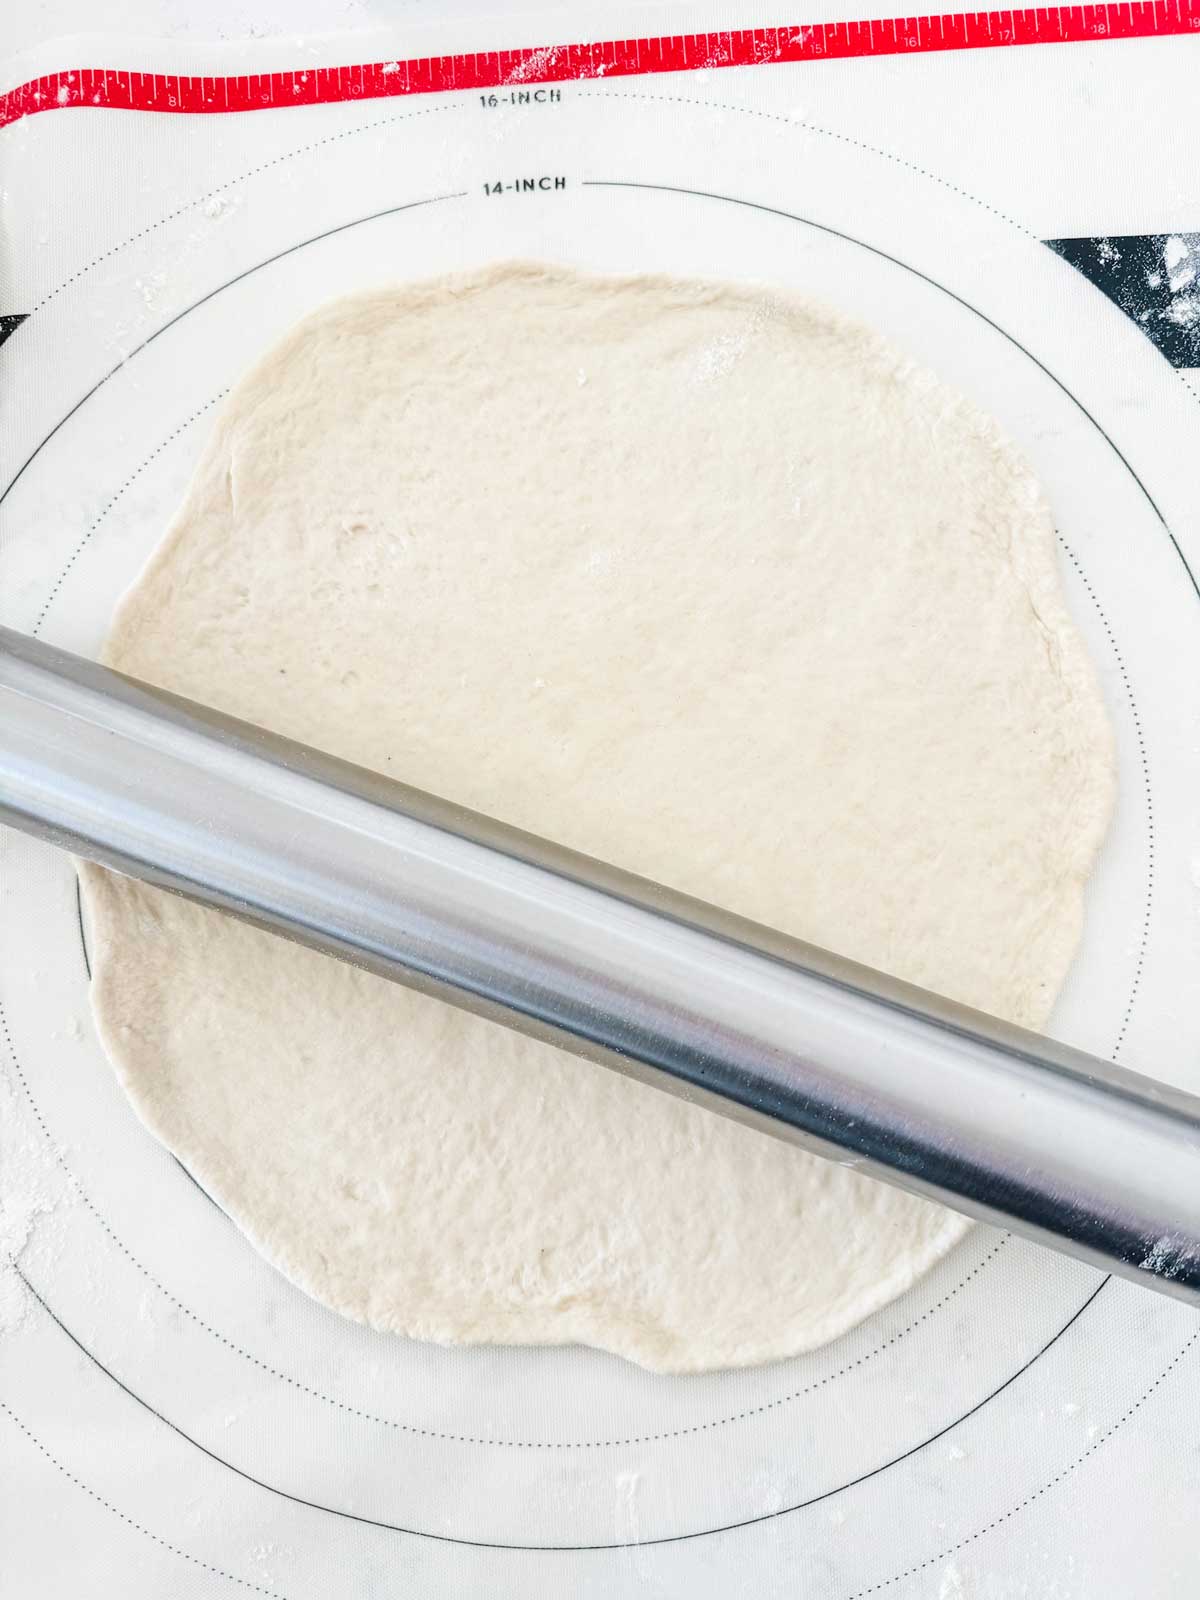 Photo of a rolled out pizza dough.